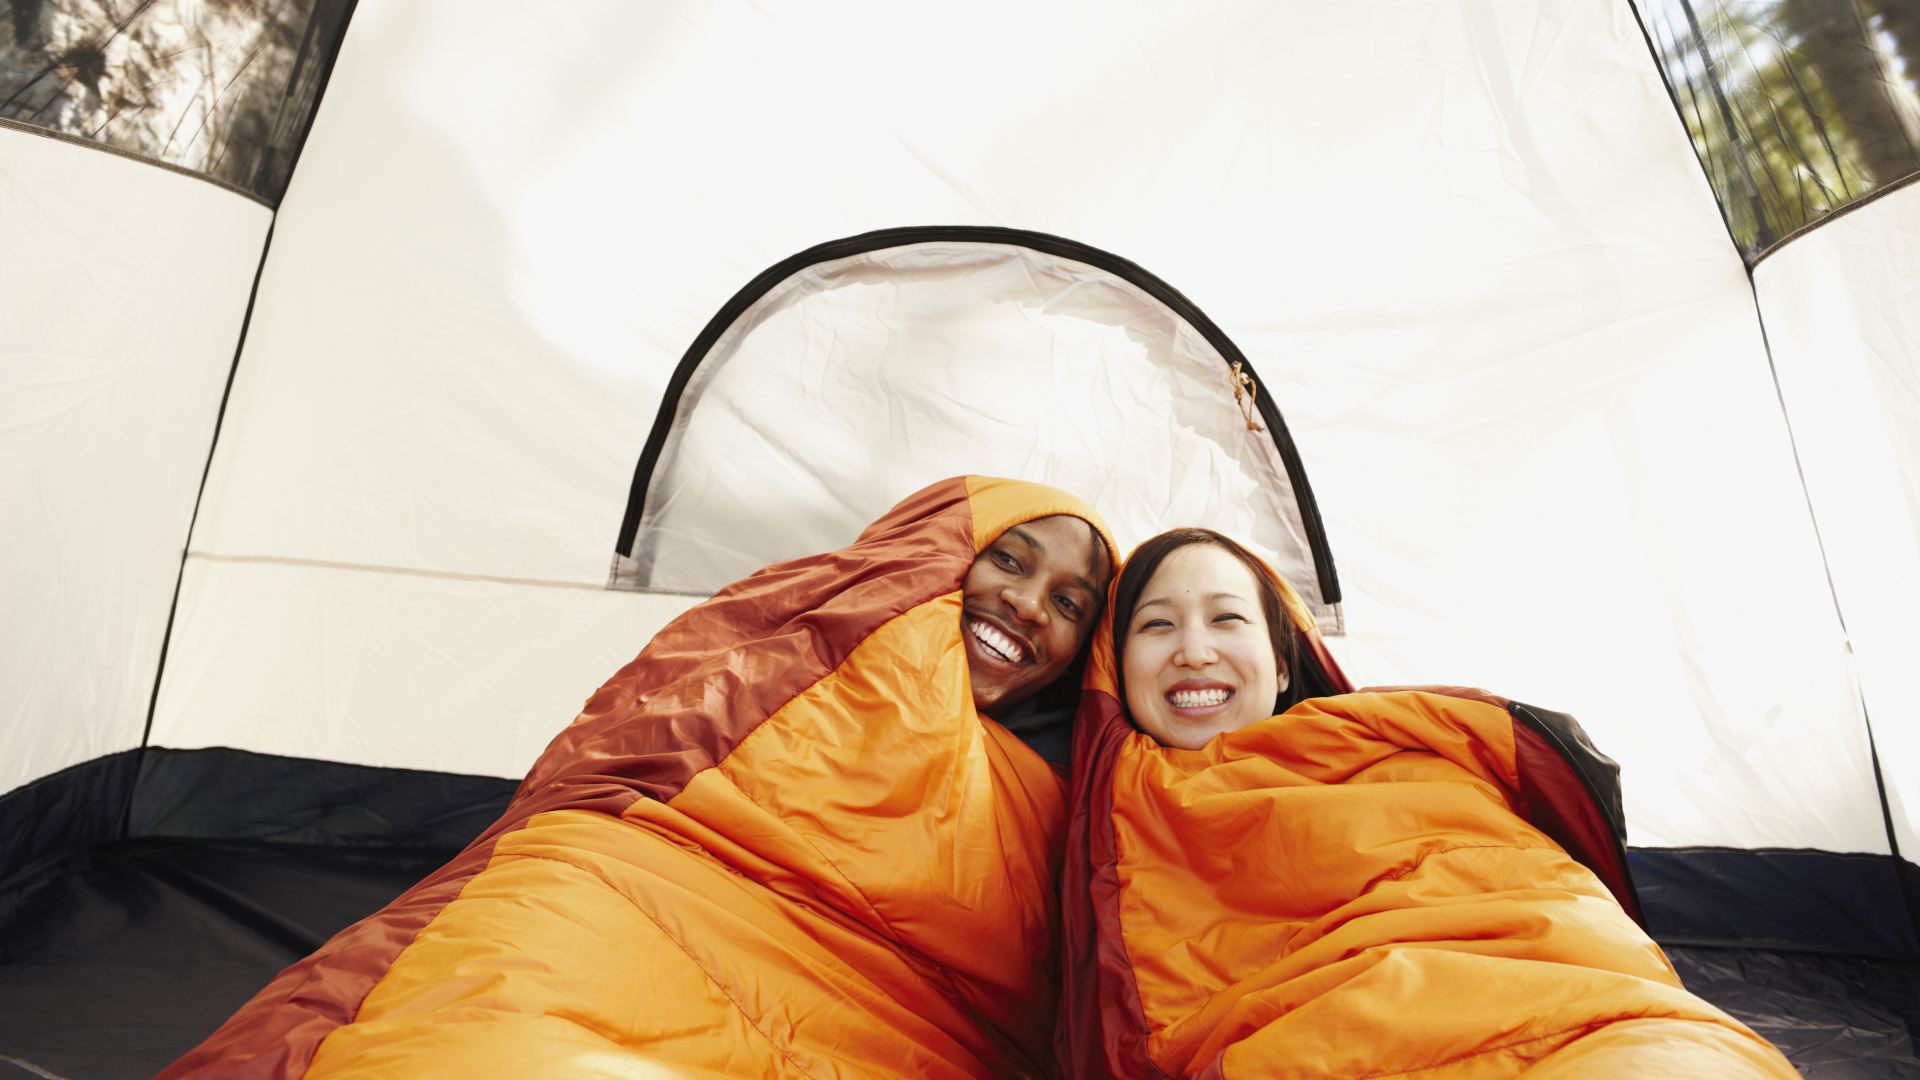 8 Of The Best Ways To Light Up Your Tent - Advice & Tips - Camping - Out  and About Live